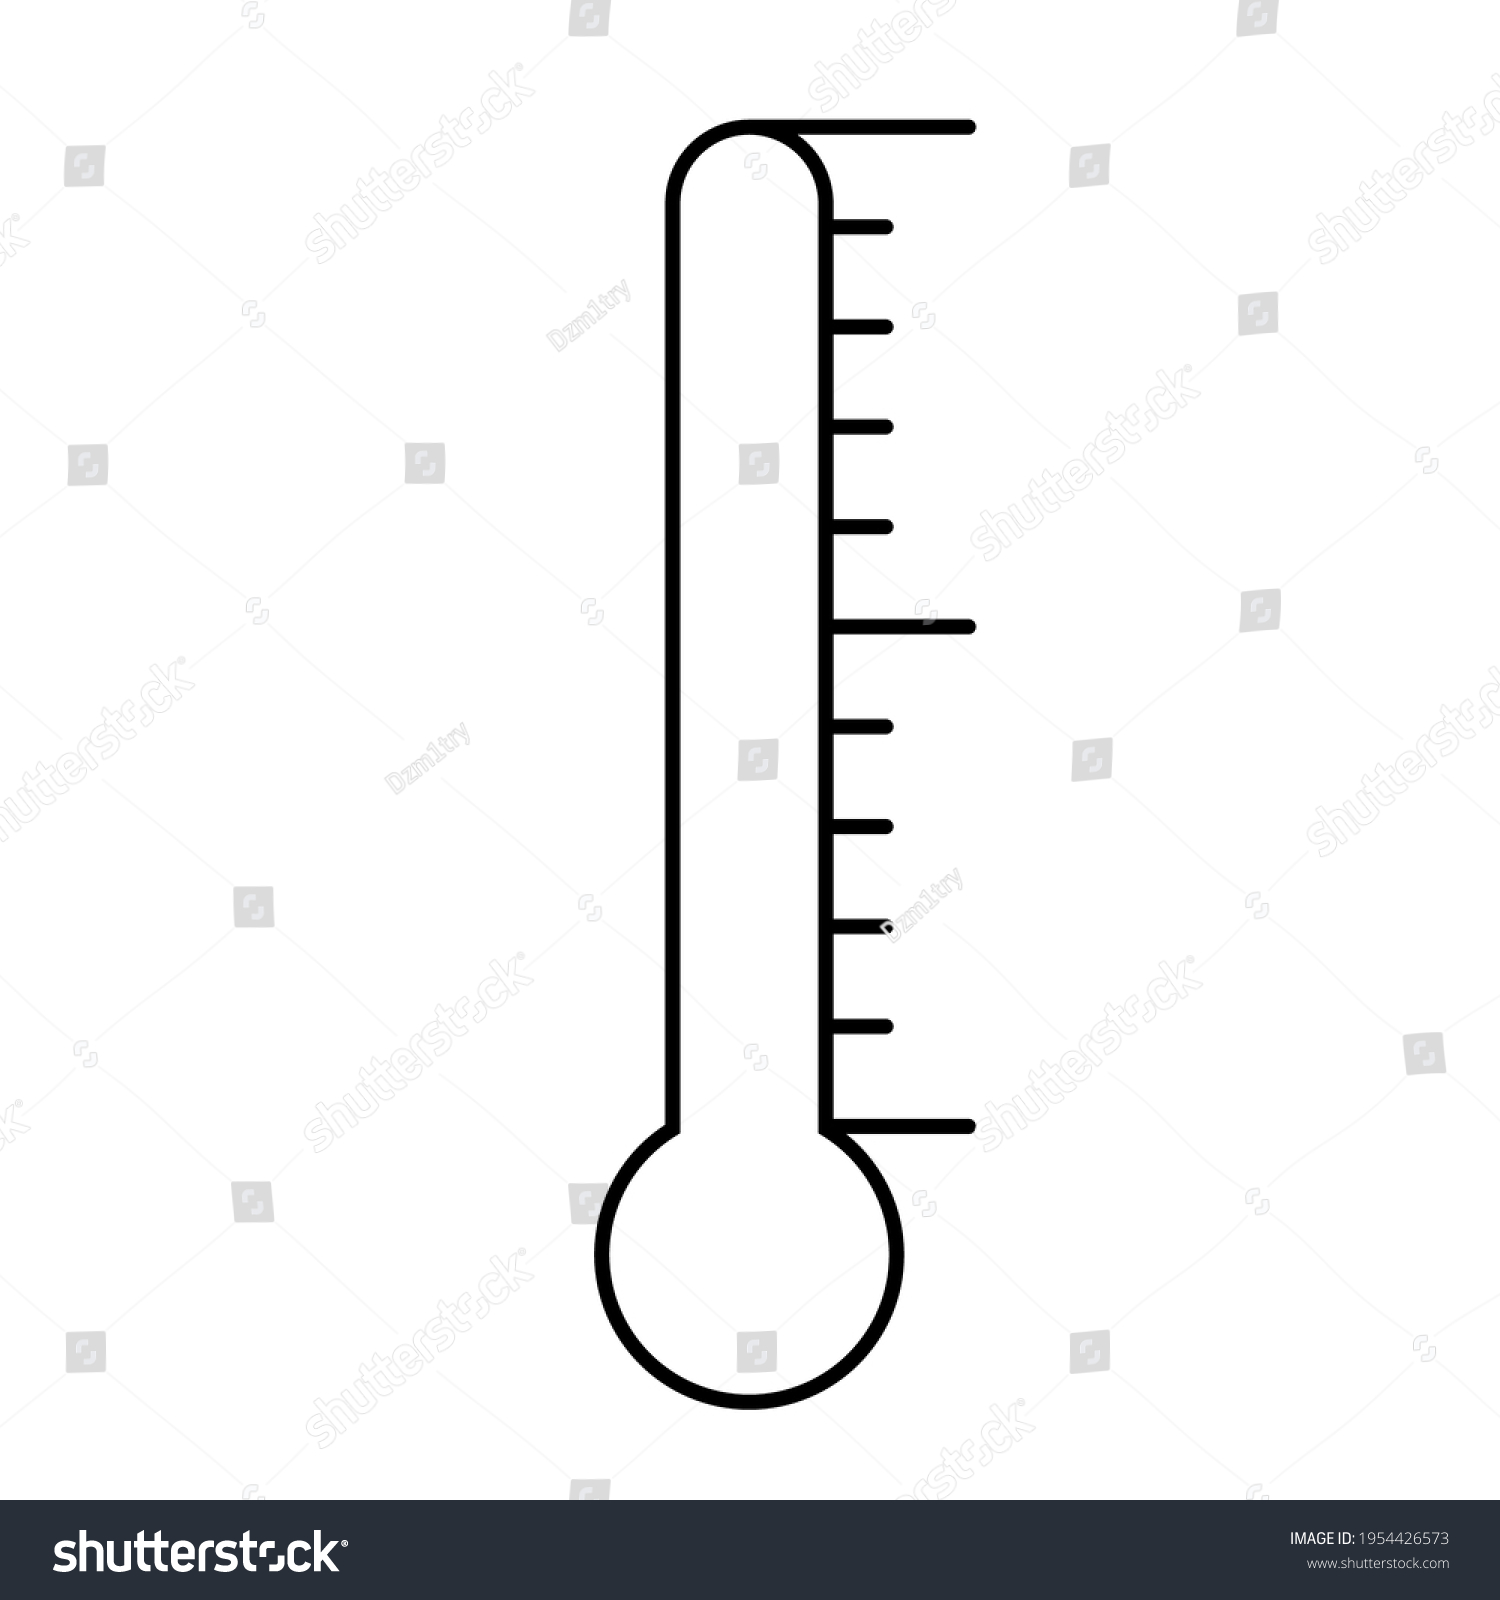 Blank Goal thermometer for teatchers. Clipart image isolated on white background. #1954426573